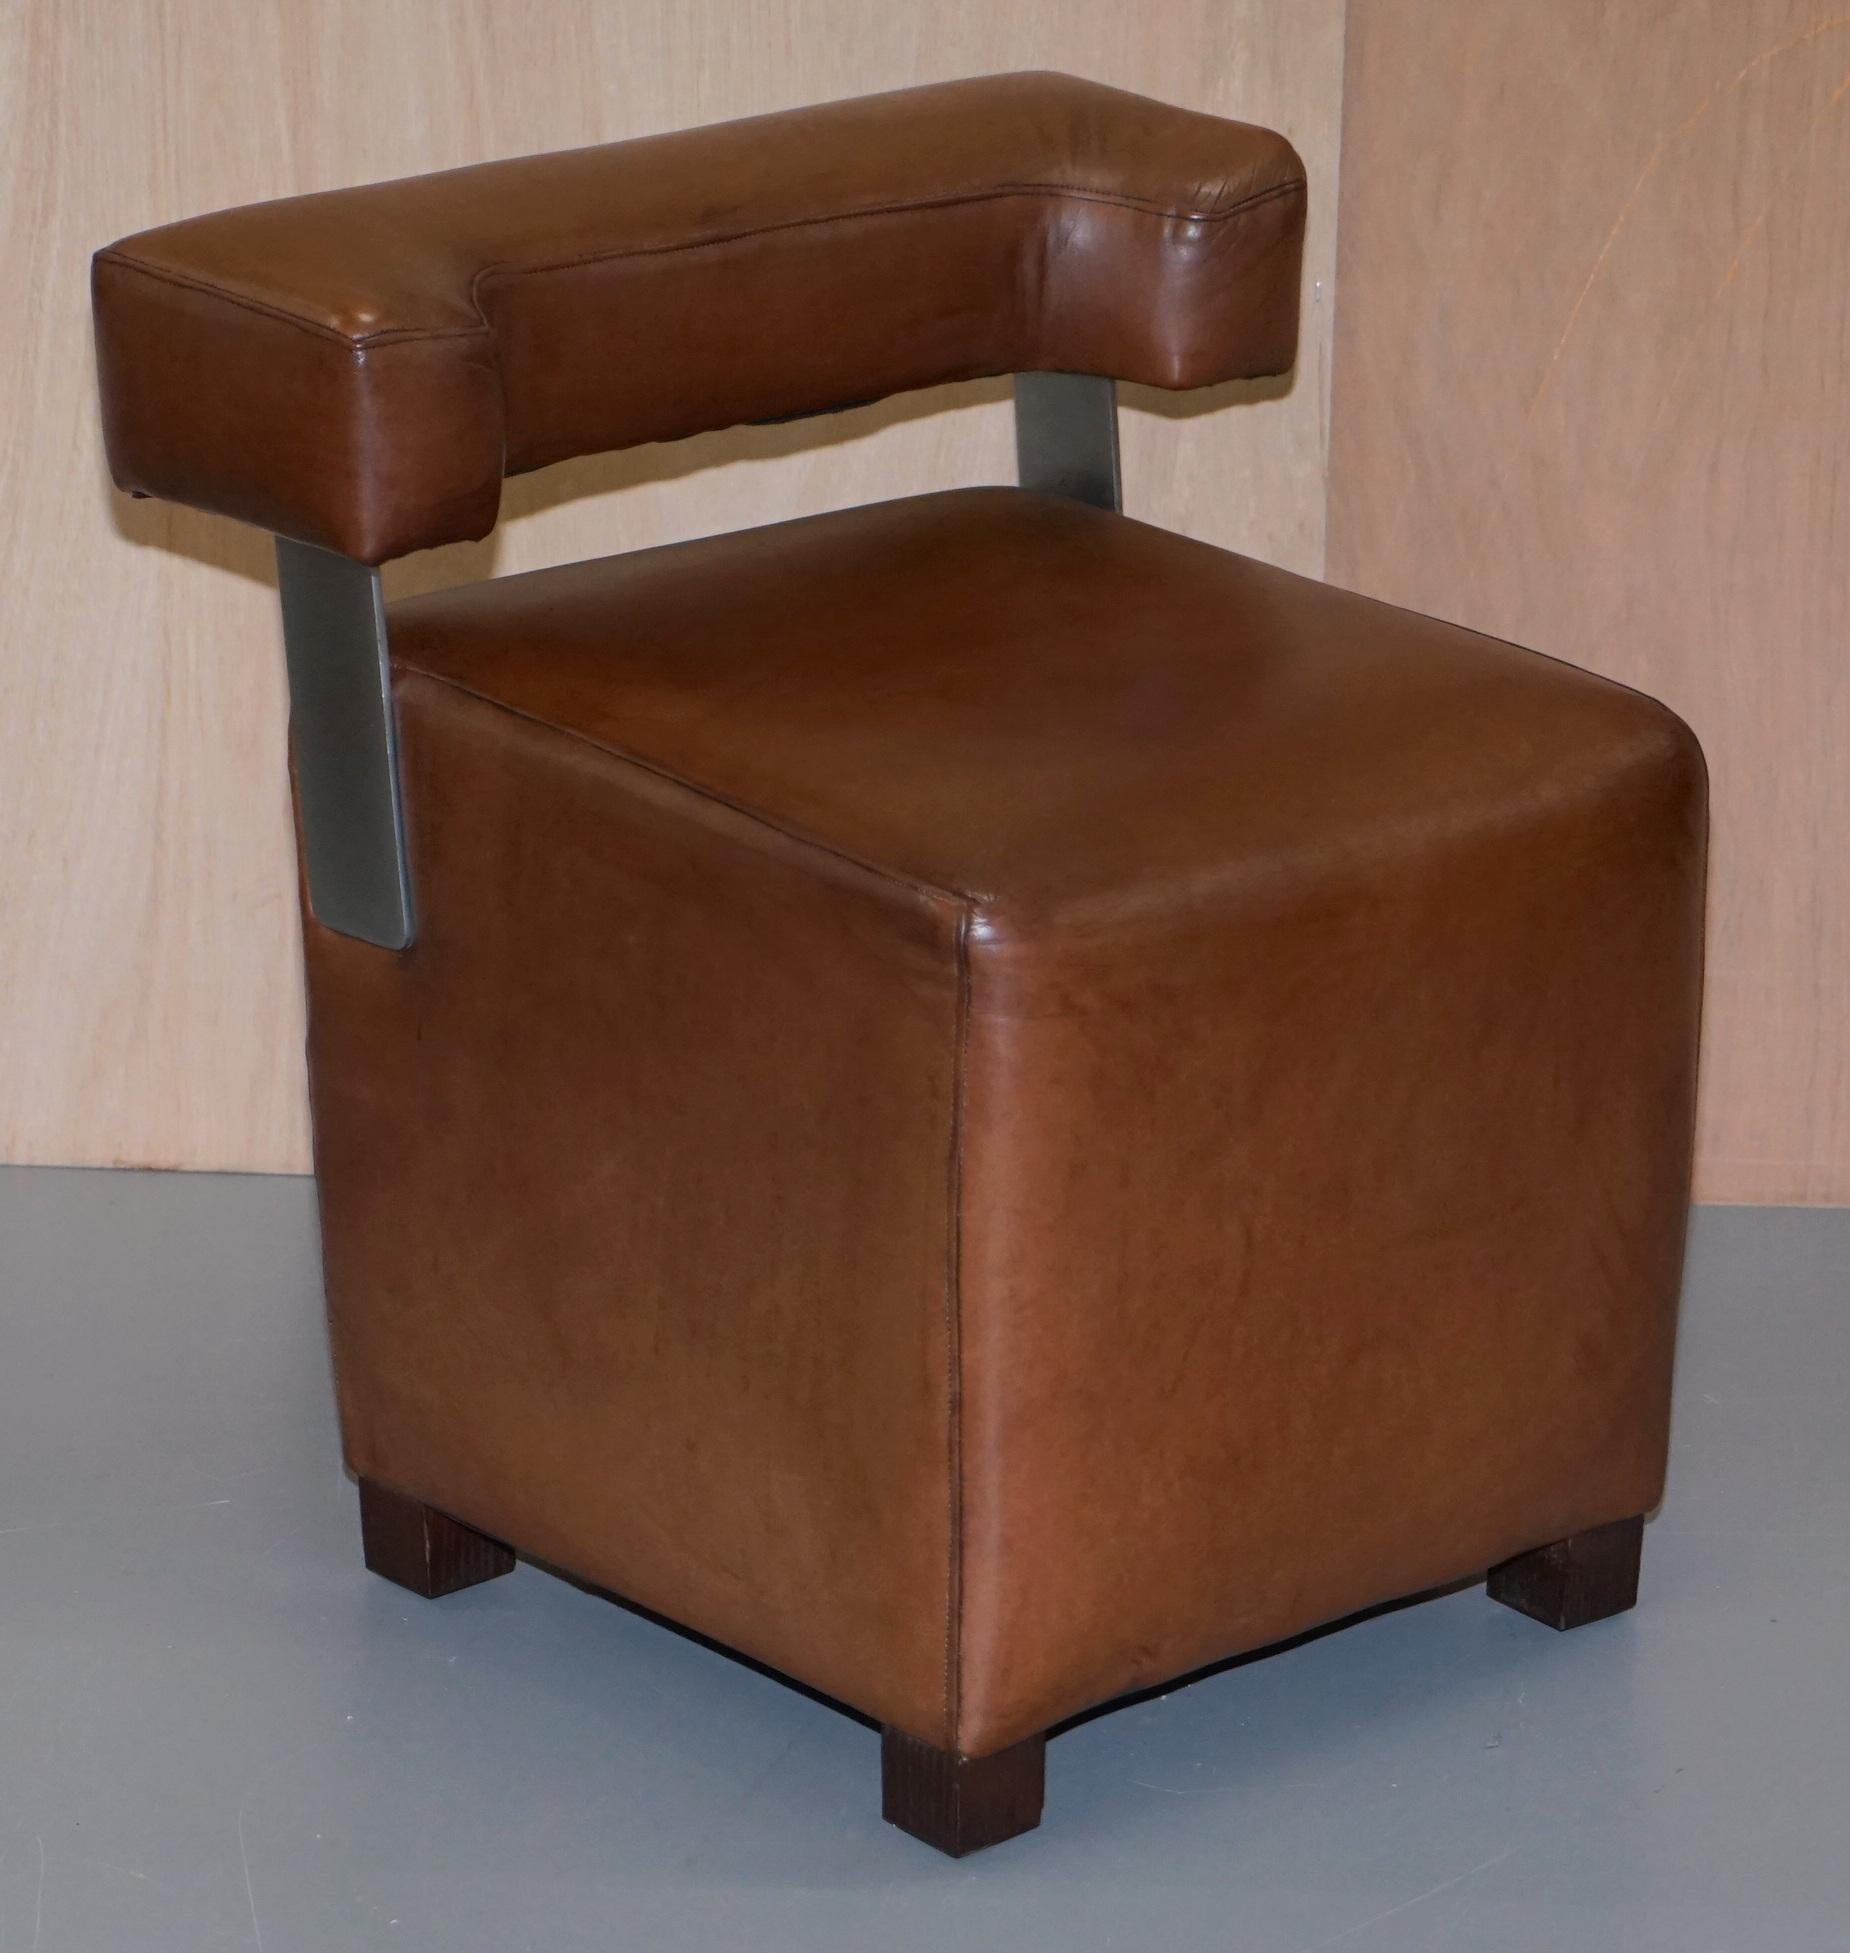 We are delighted to offer for sale this lovely pair of small heritage brown leather stool armchairs with chrome supports

A good looking and decorative pair of contemporary small armchairs, they are very utilitarian and great for when you have